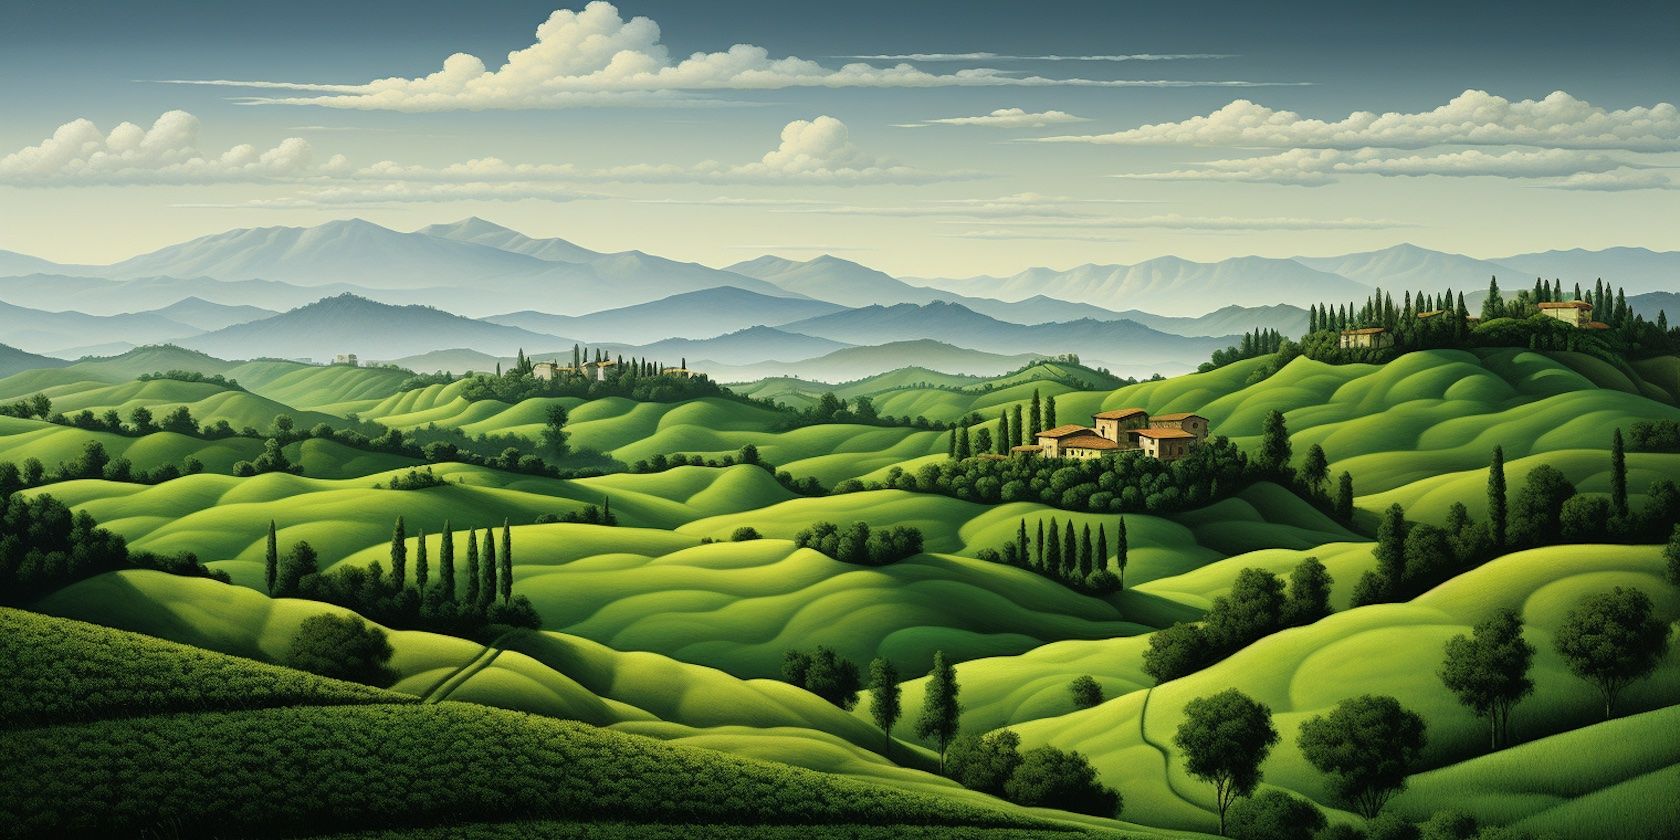 Oil painting of green rolling hills created with Midjourney